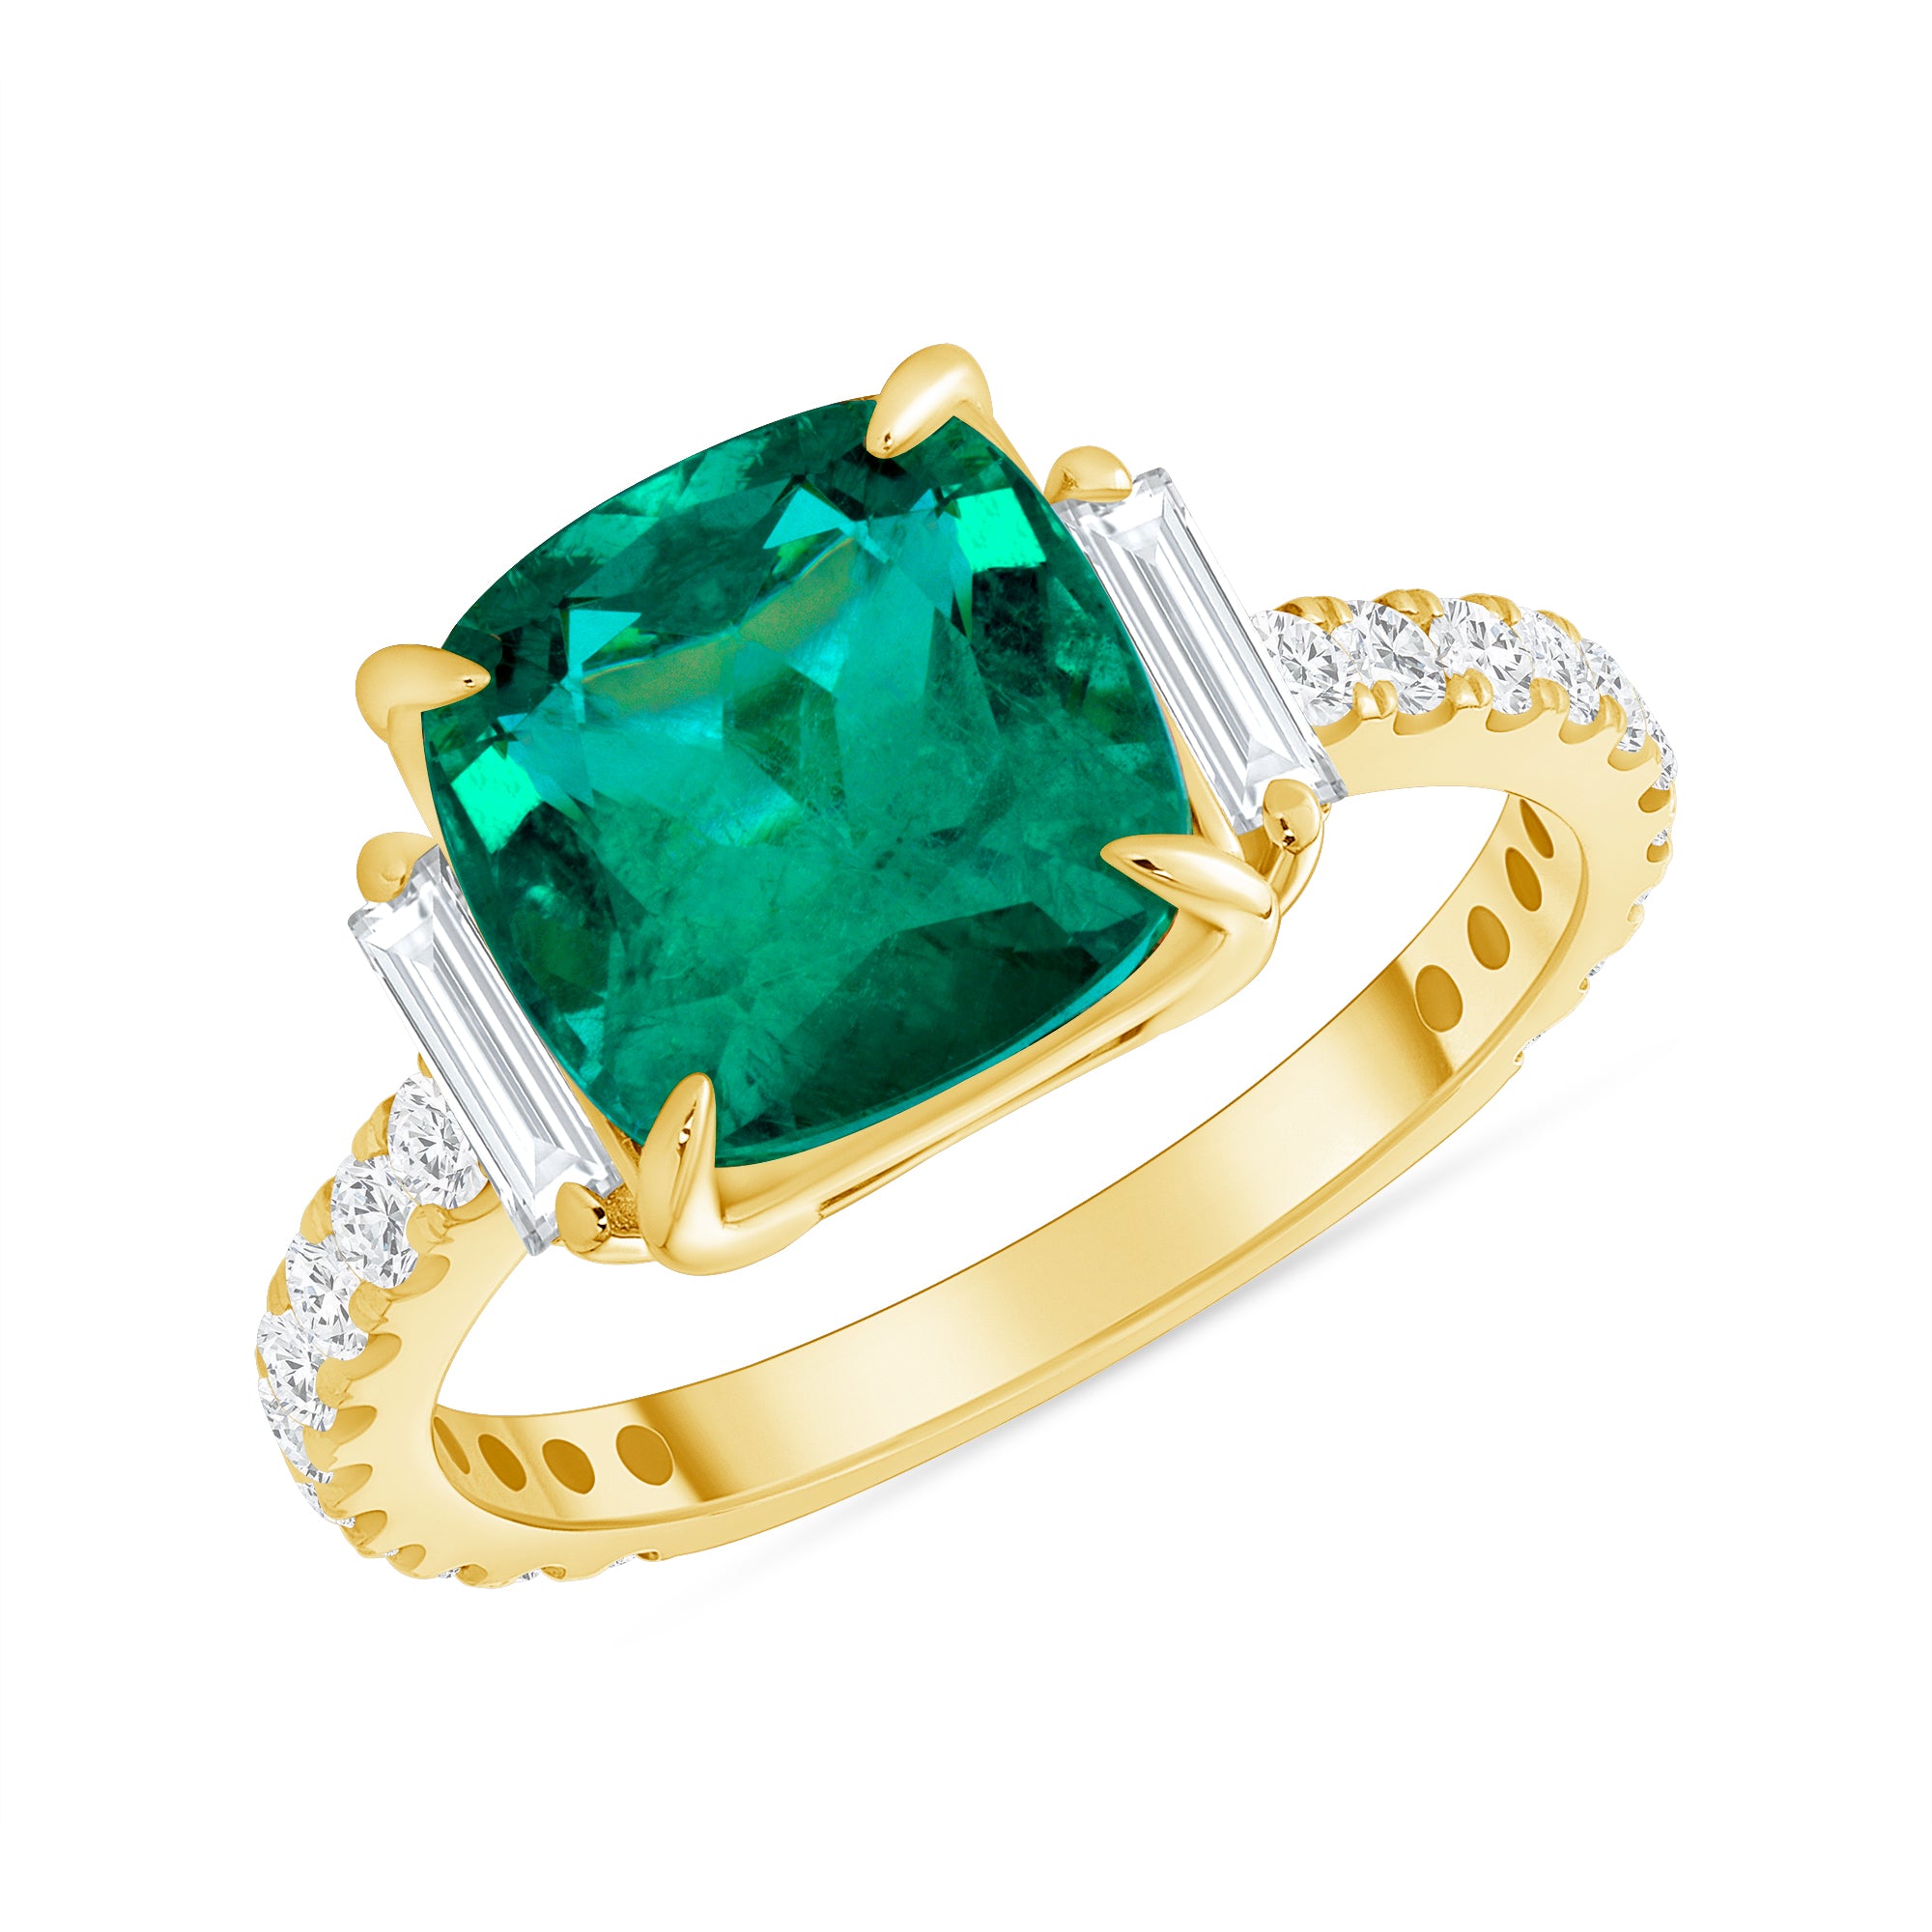 3.27 Ct. Cushion-Cut Colombian Emerald Solitaire Ring with 0.73 Ct. Diamond Accents 14k Yellow Gold